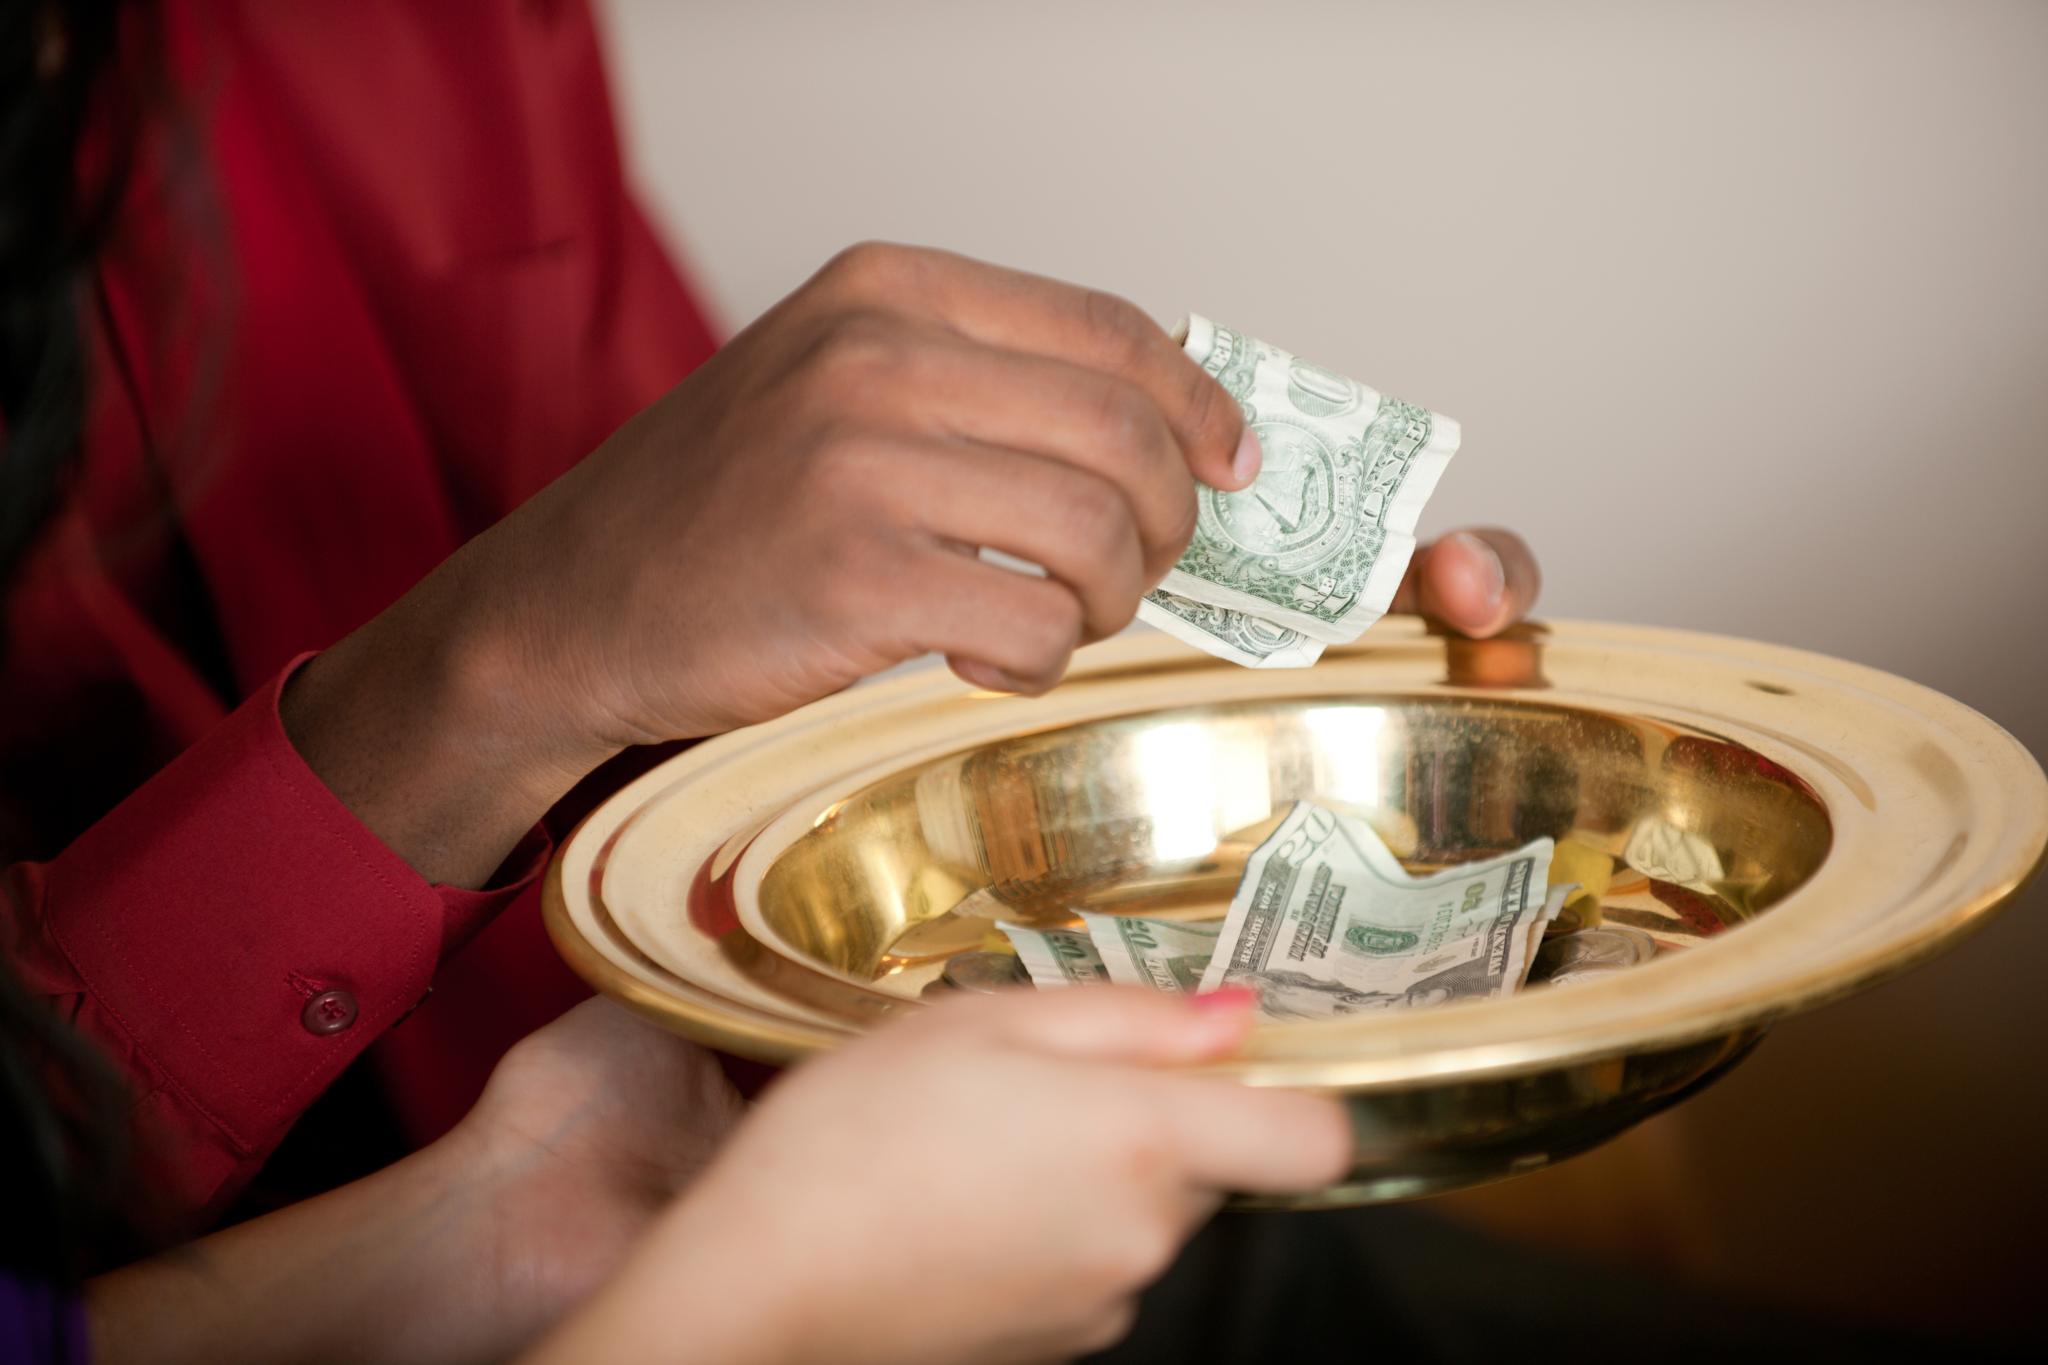 Is It Appropriate For a Pastor to Fundraise For a Luxury Item?